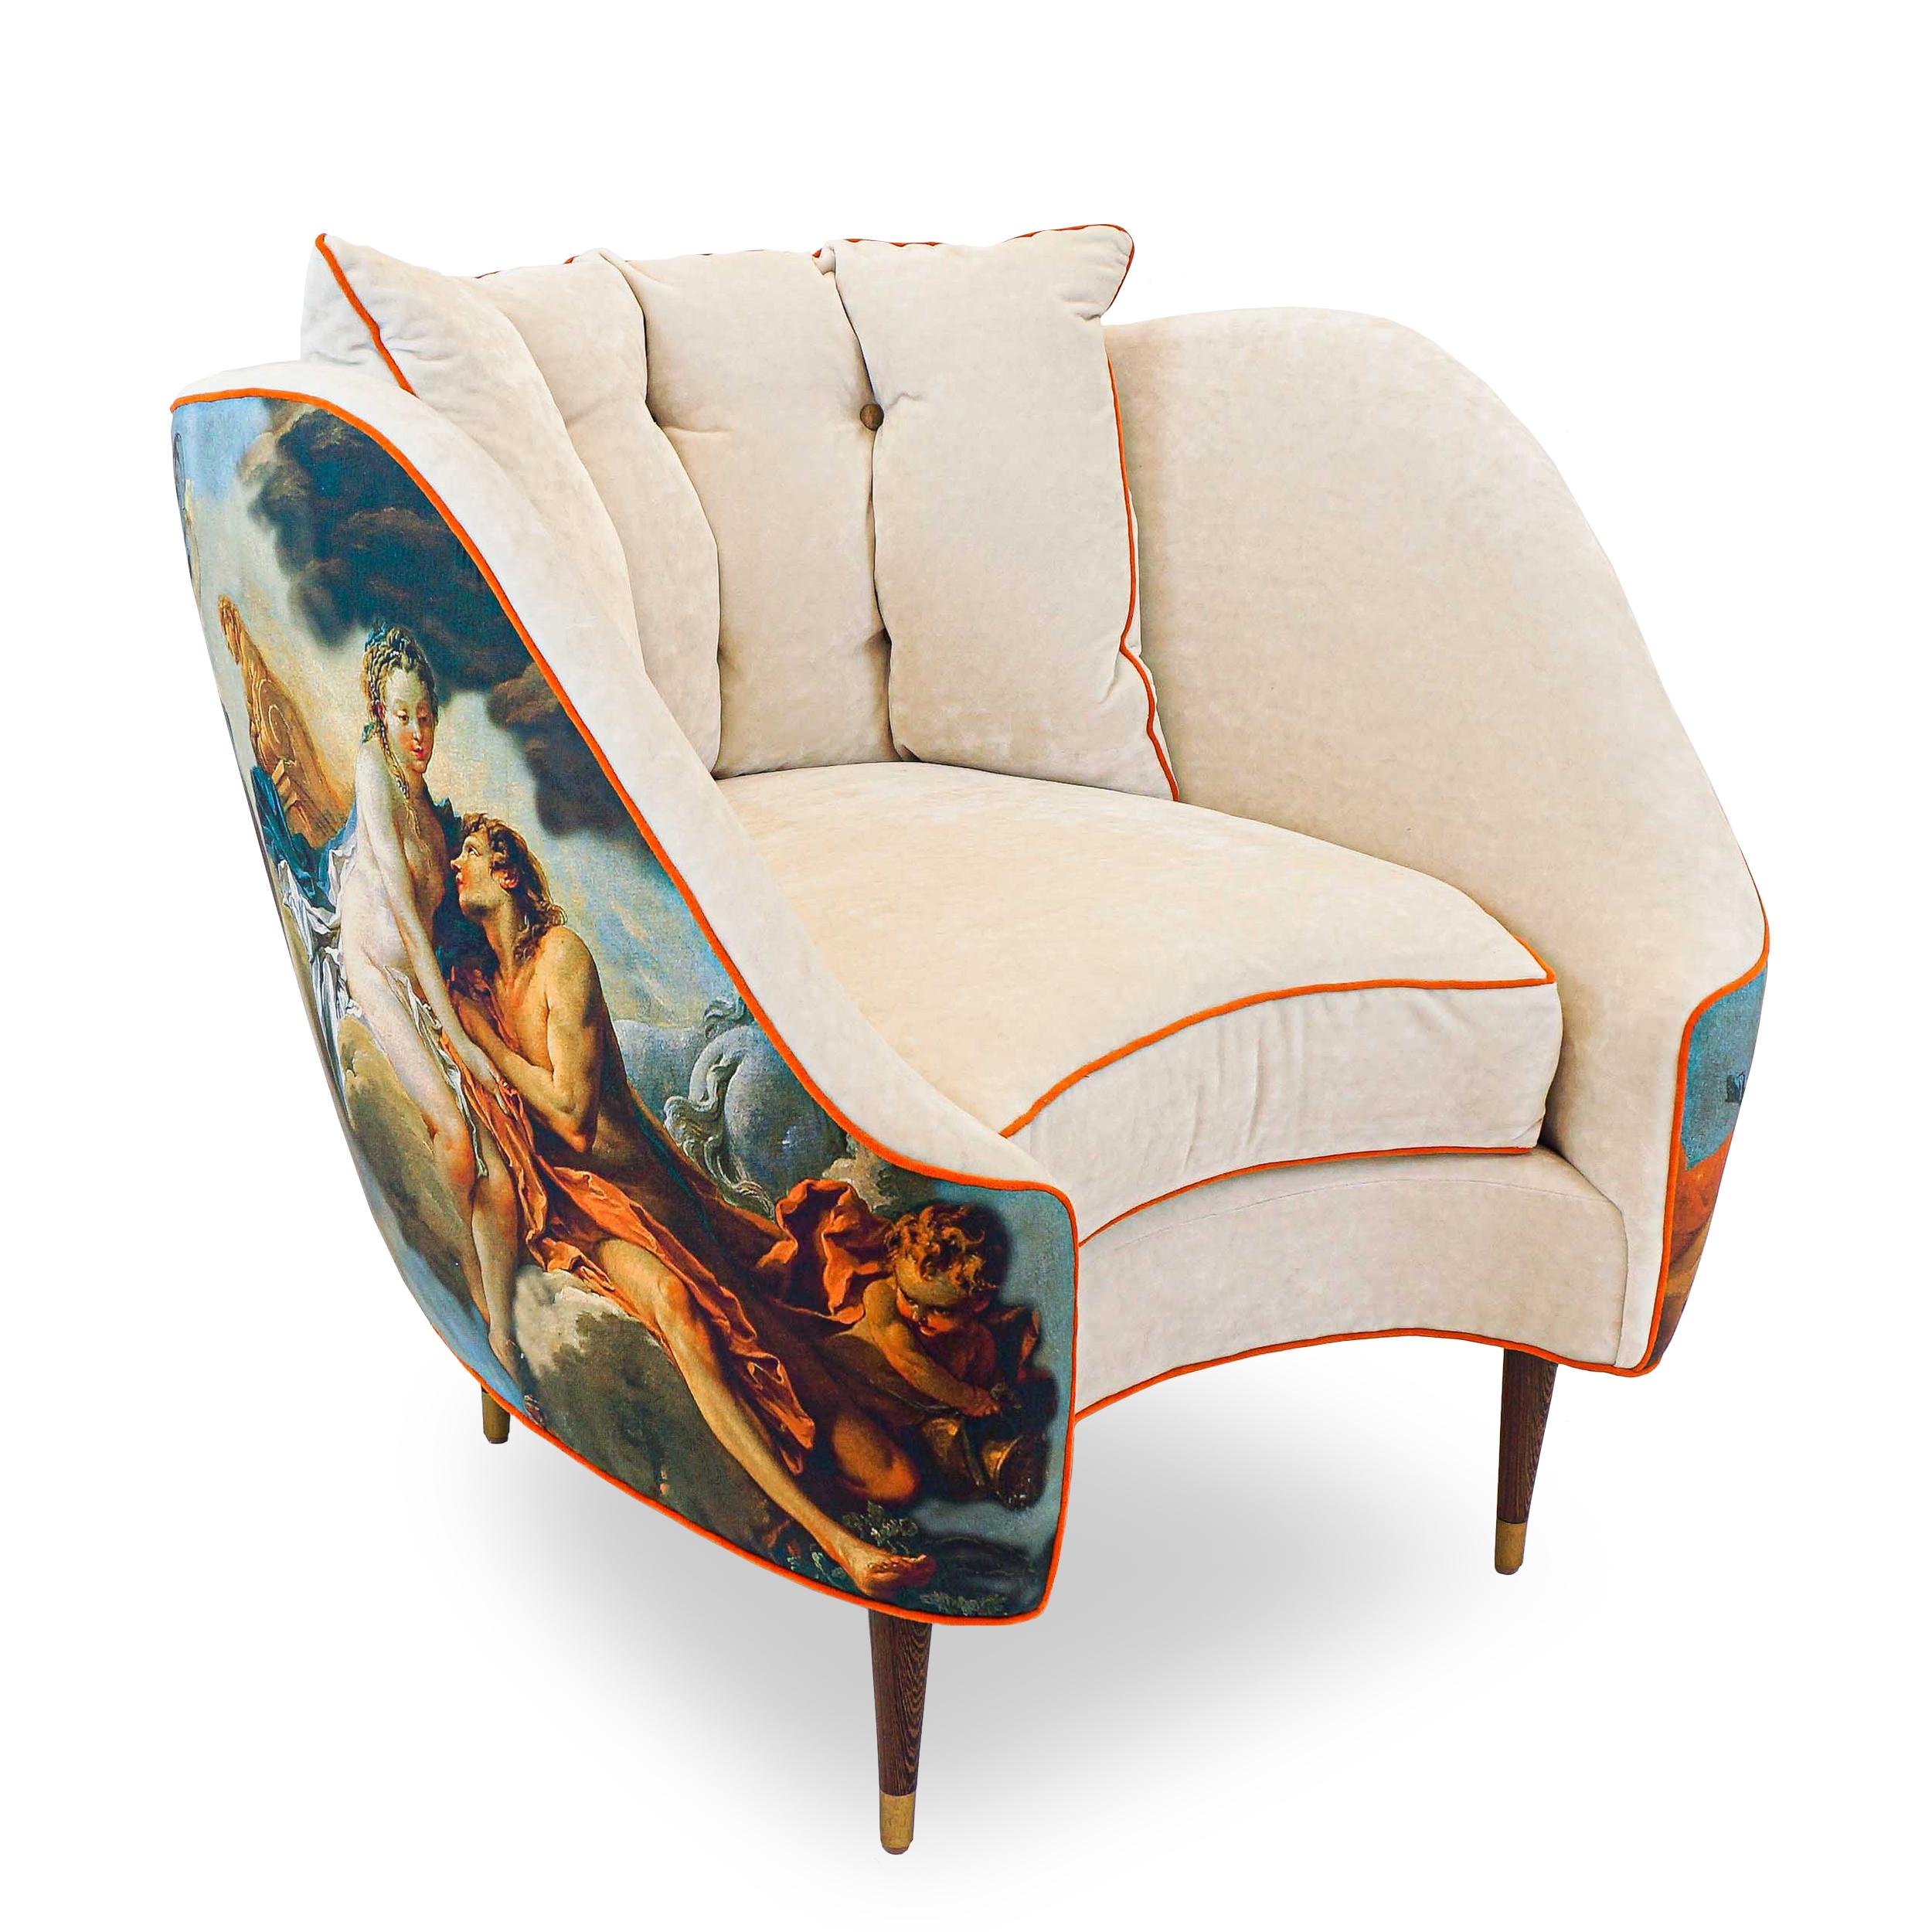 This highly original bucket style chair showcases our novel use of form in furniture design and disruptive fabric arrangements. Covered in a combination of a Pierre Frey printed fabric in an adaptation of a classical artwork and a soft creamy cut